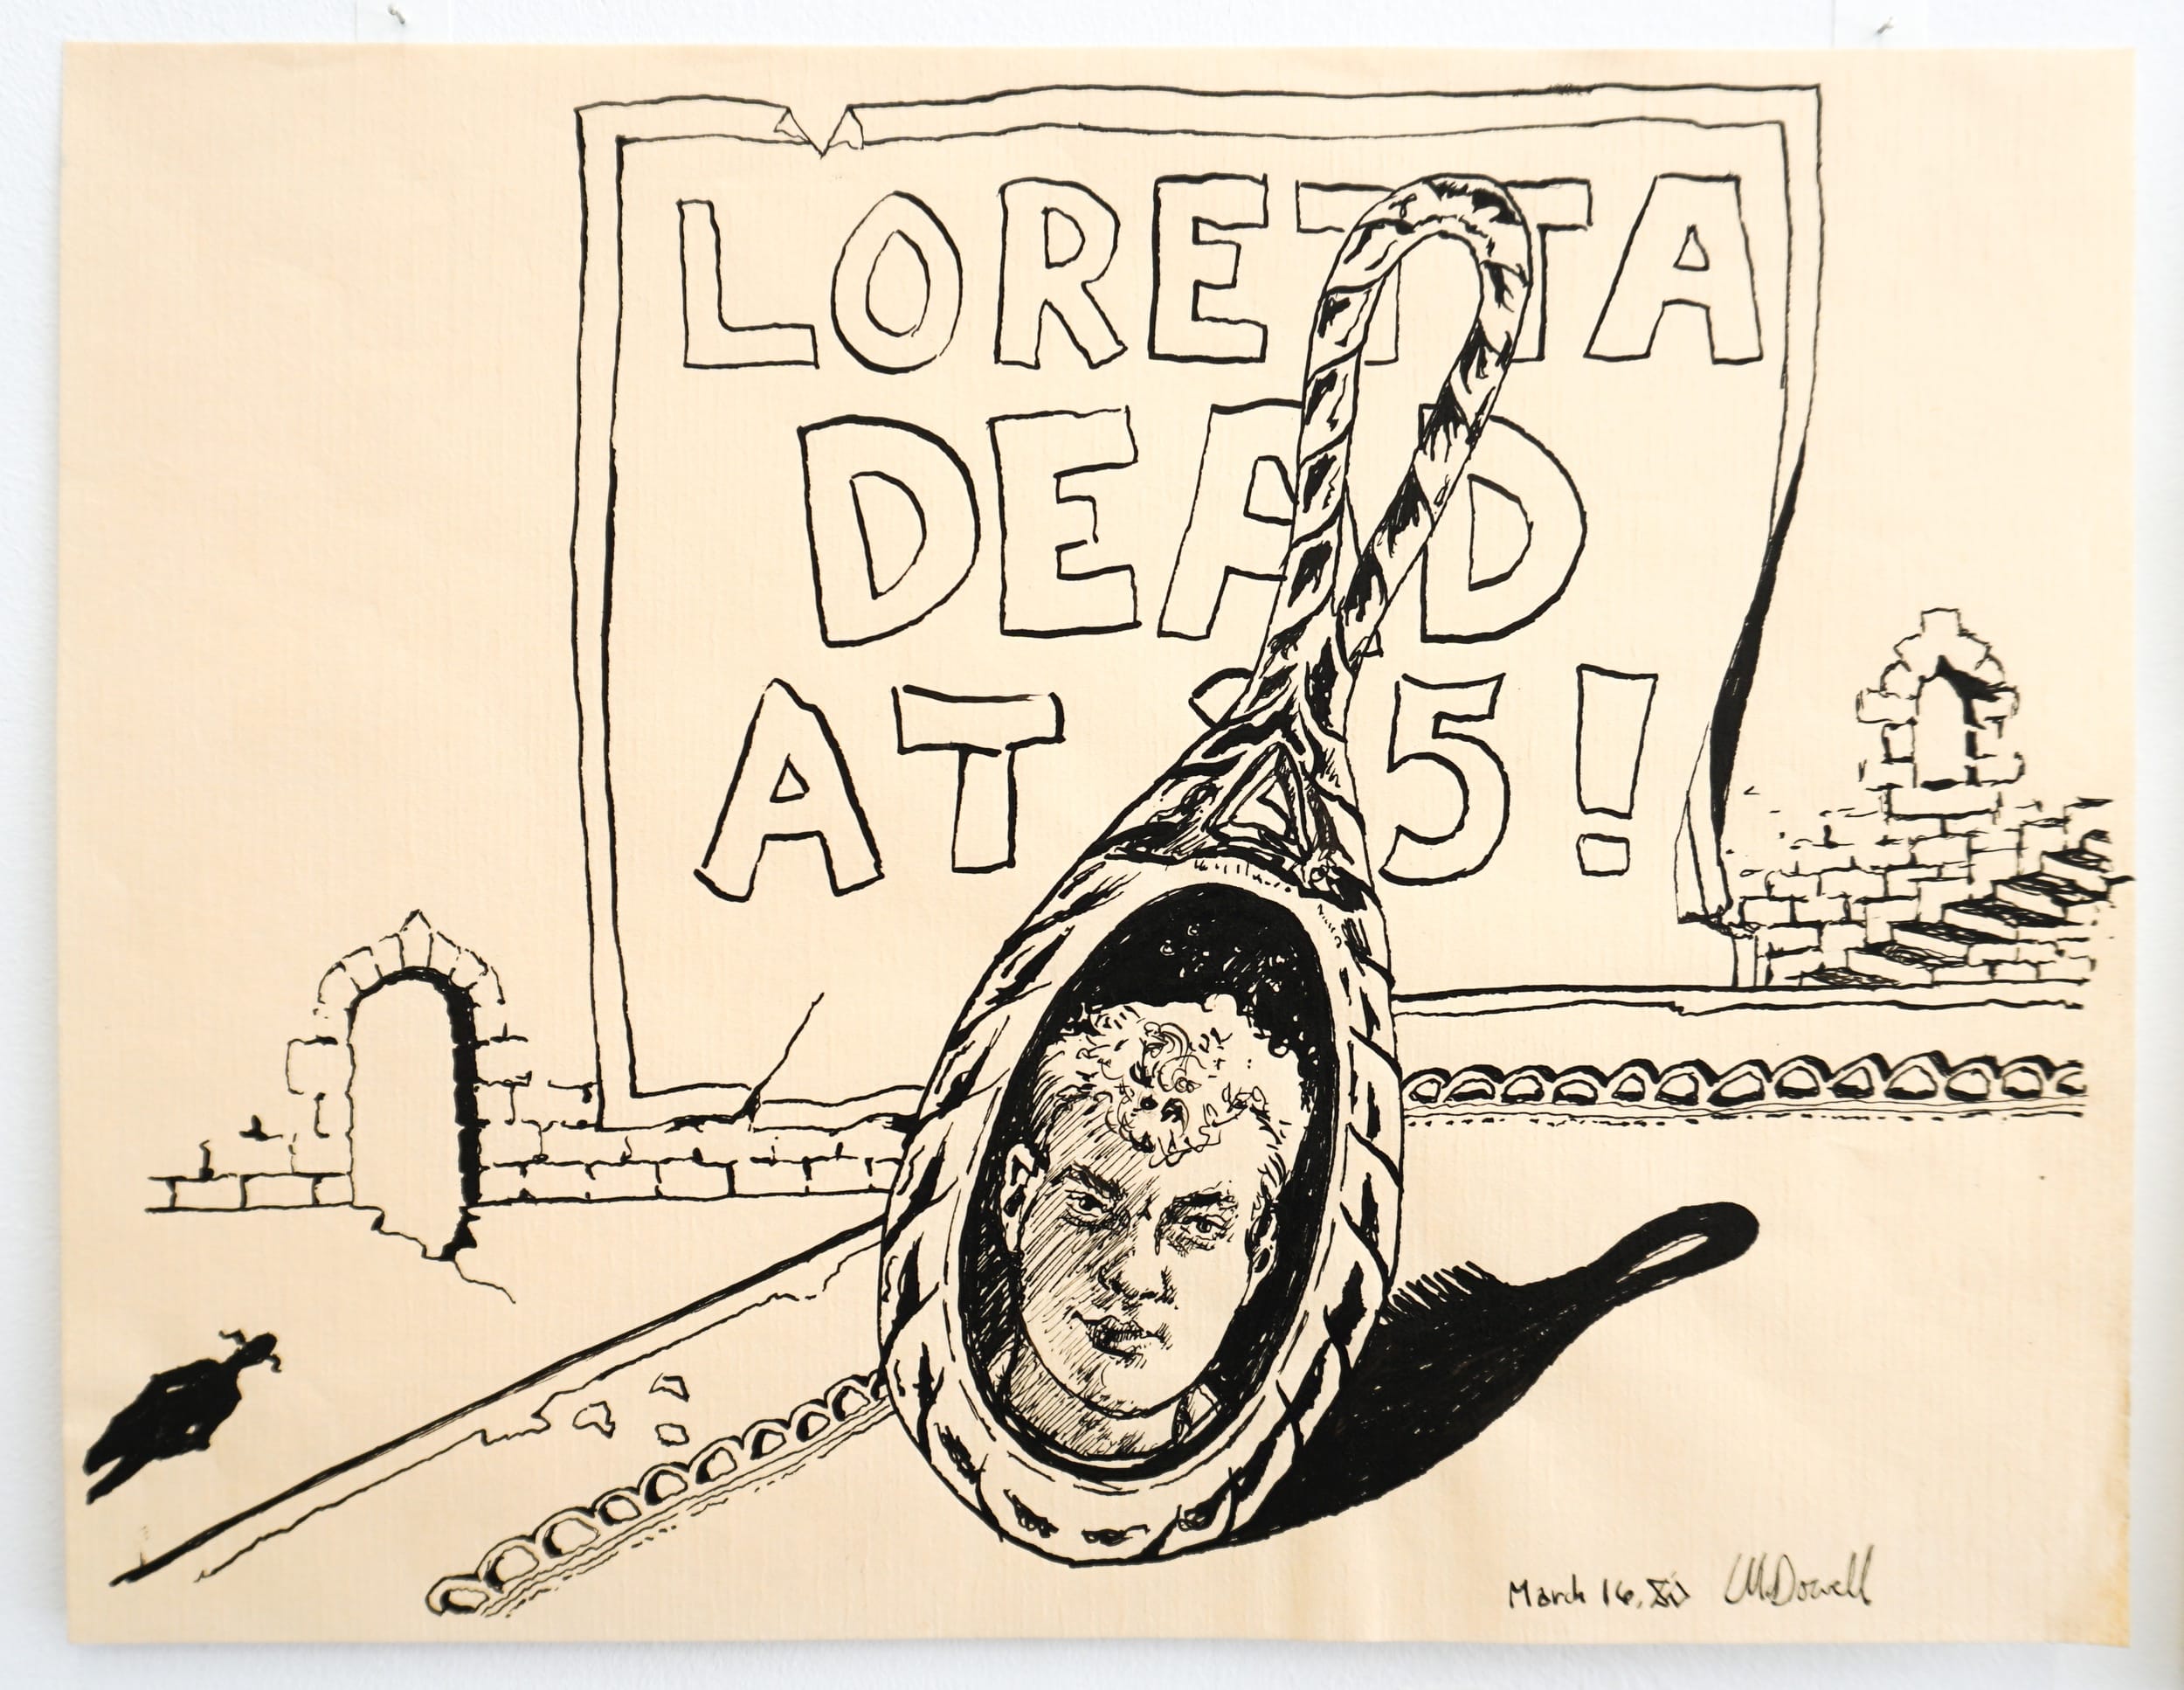  Curt McDowell  Untitled (Loretta dead at 25!) , 1980 Ink on paper 8.5 x 11 inches 